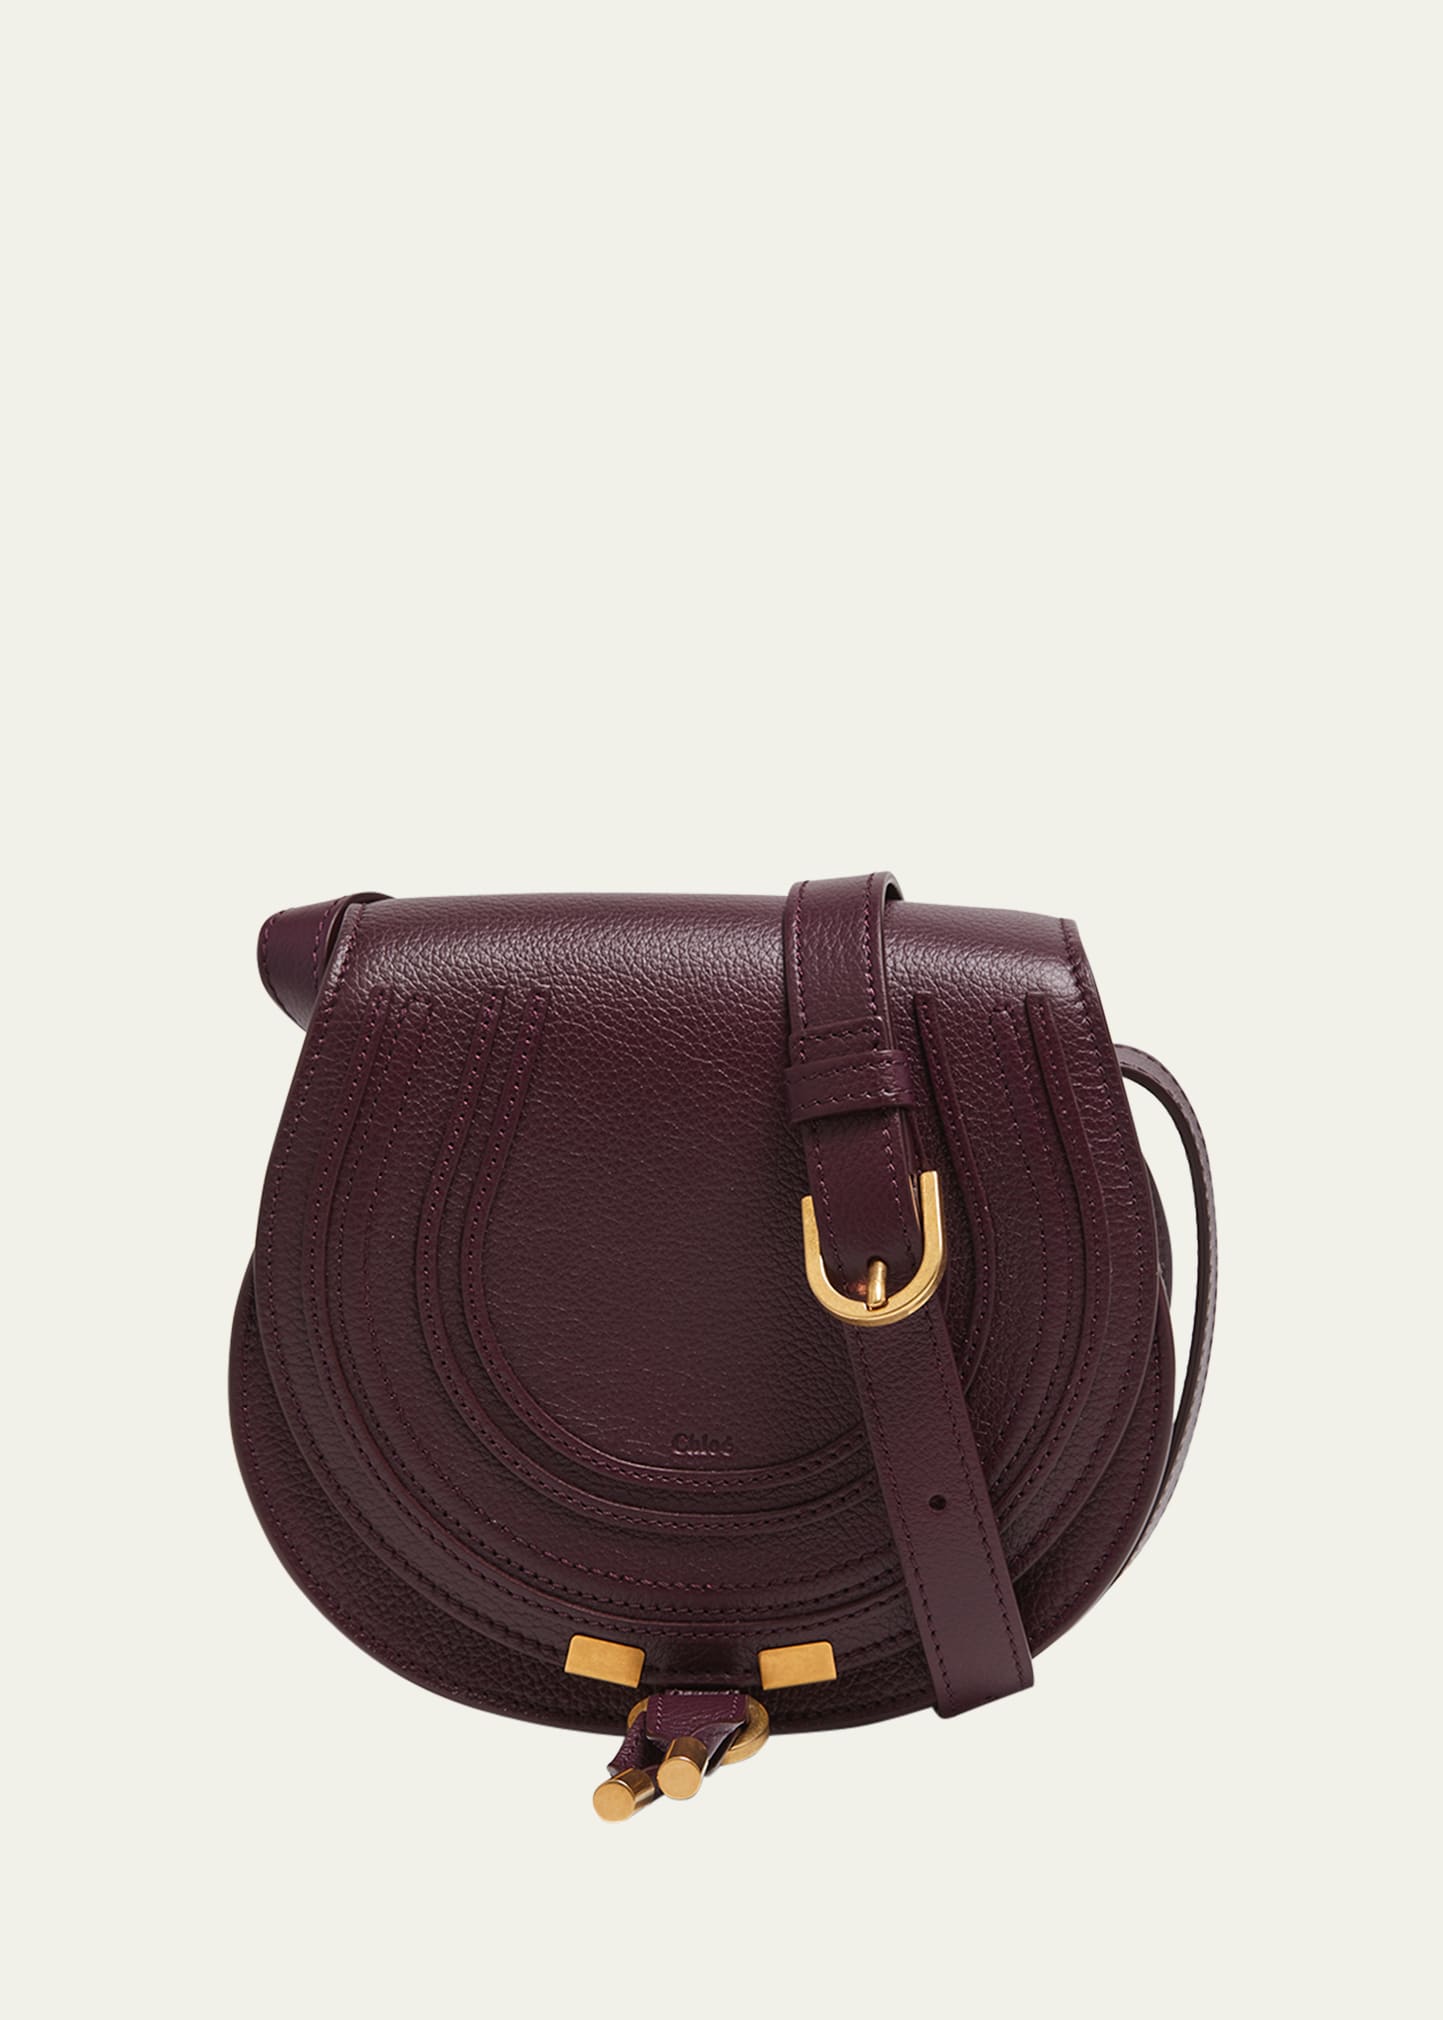 Chloé Marcie Small Crossbody Bag In Grained Leather In Burgundy